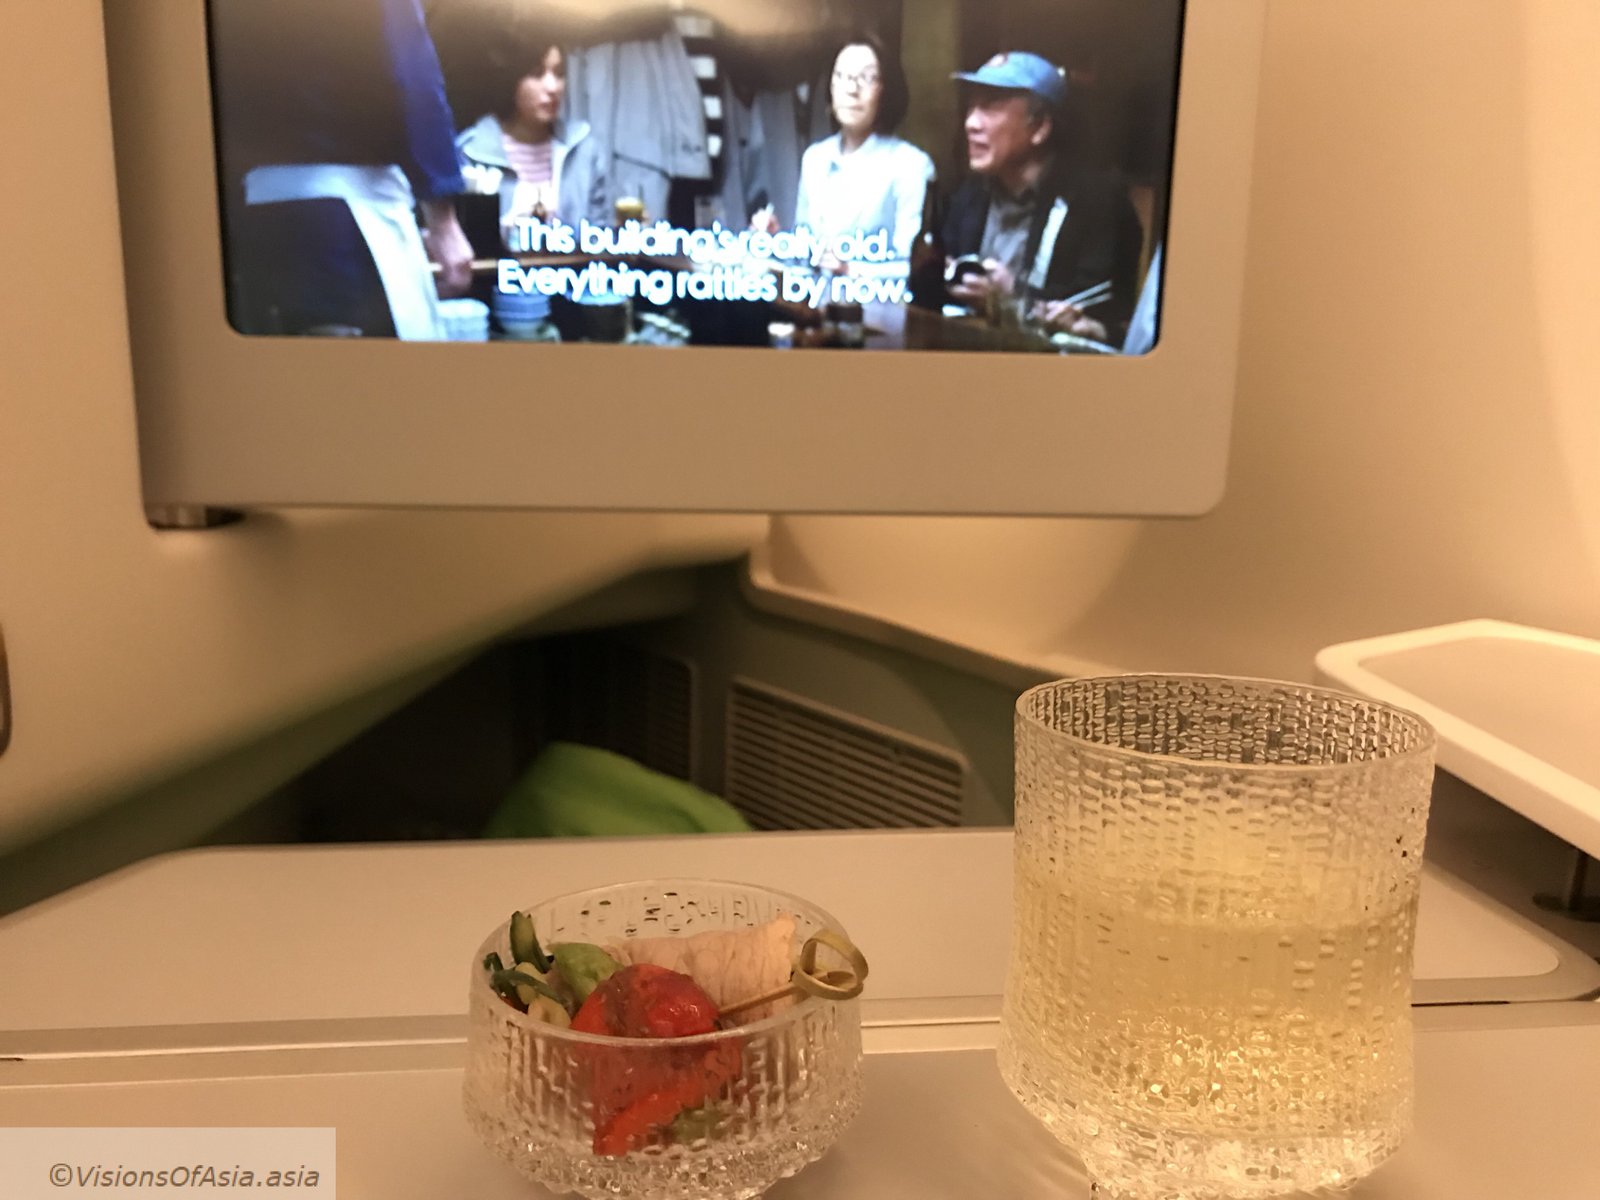 Entrée of business class meal on flight AY099